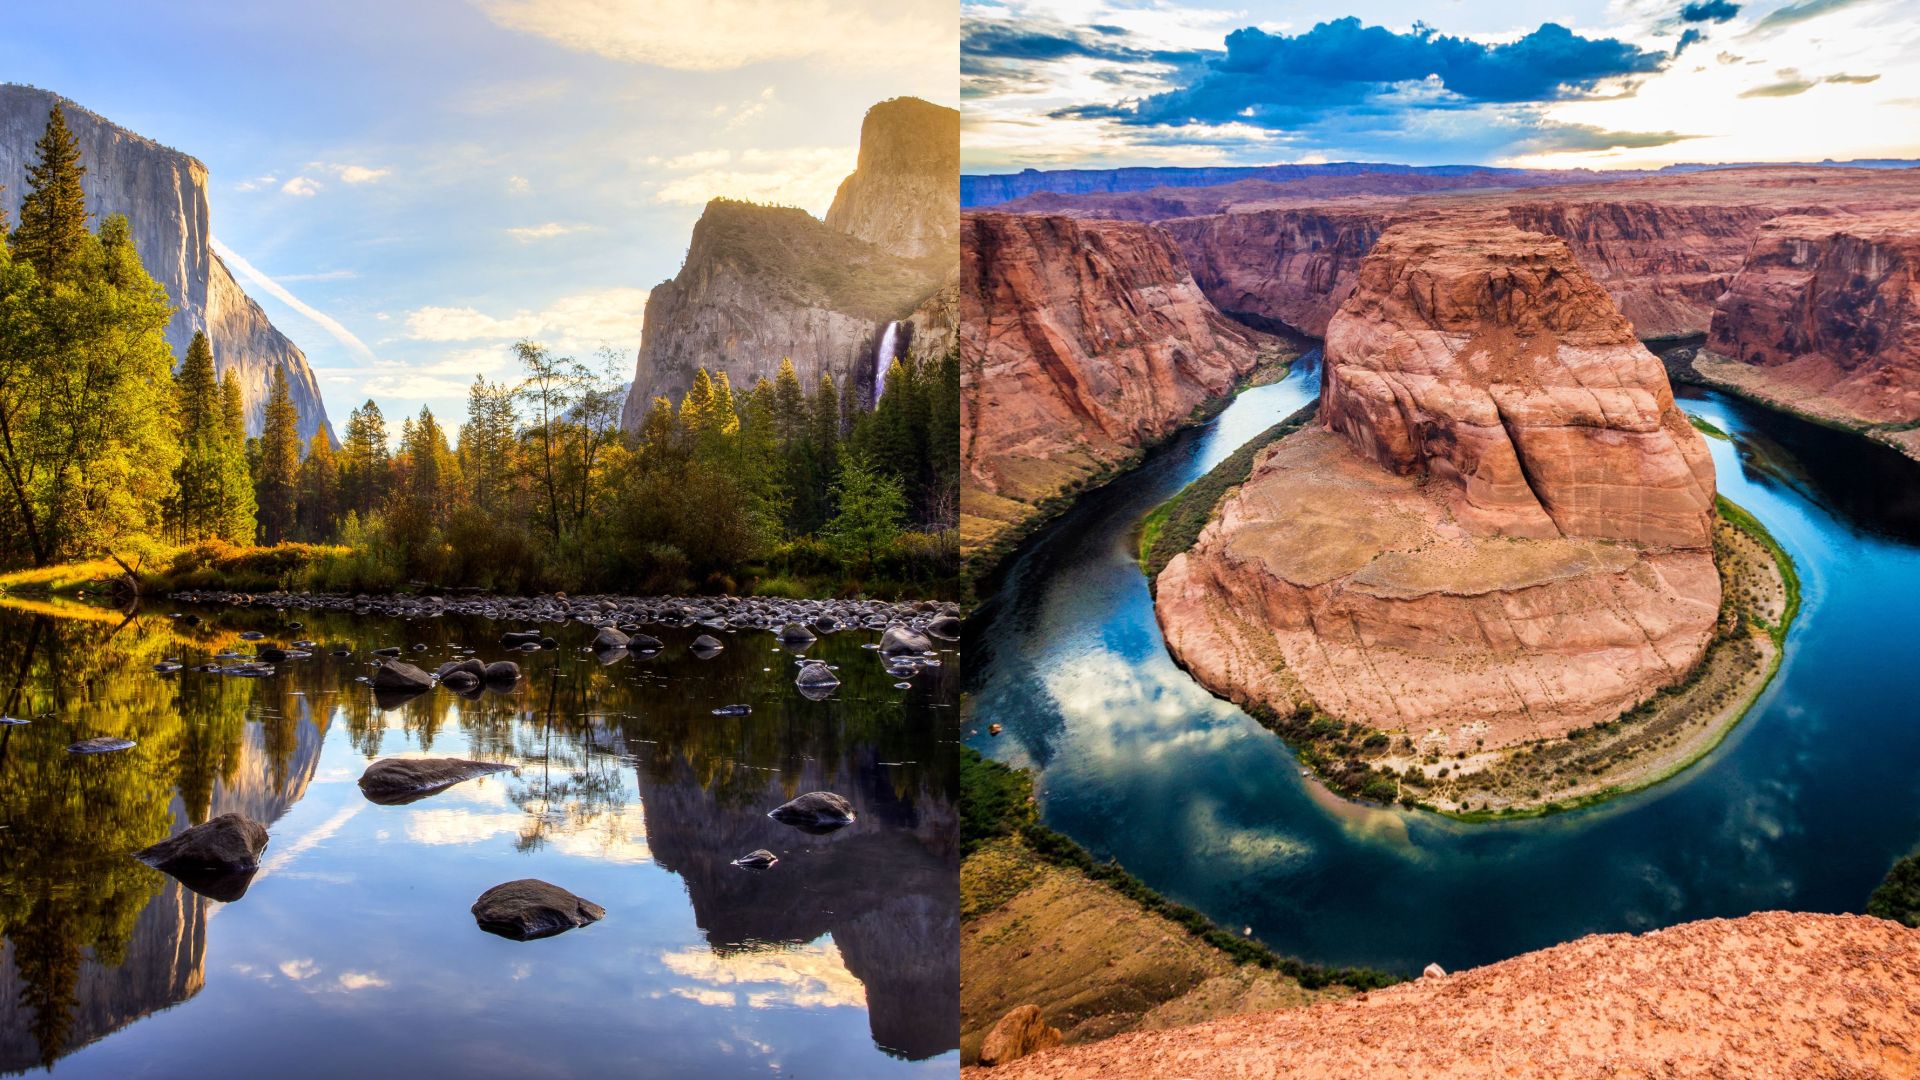 <p>                     From snowy mountain tops to sunset-hued canyons, all 423 national park sites in the United States are worth visiting. But that just makes it all the more difficult to choose which to head to for your next vacation. Whether you’re looking for an easy stroll in a pristine nature preserve or an epic multi-day adventure, we rounded up the 24 most beautiful gems of the U.S. National Park system. Some sites are protected for their history, others for recreation, and most simply for the natural wonder of its surroundings.                   </p>